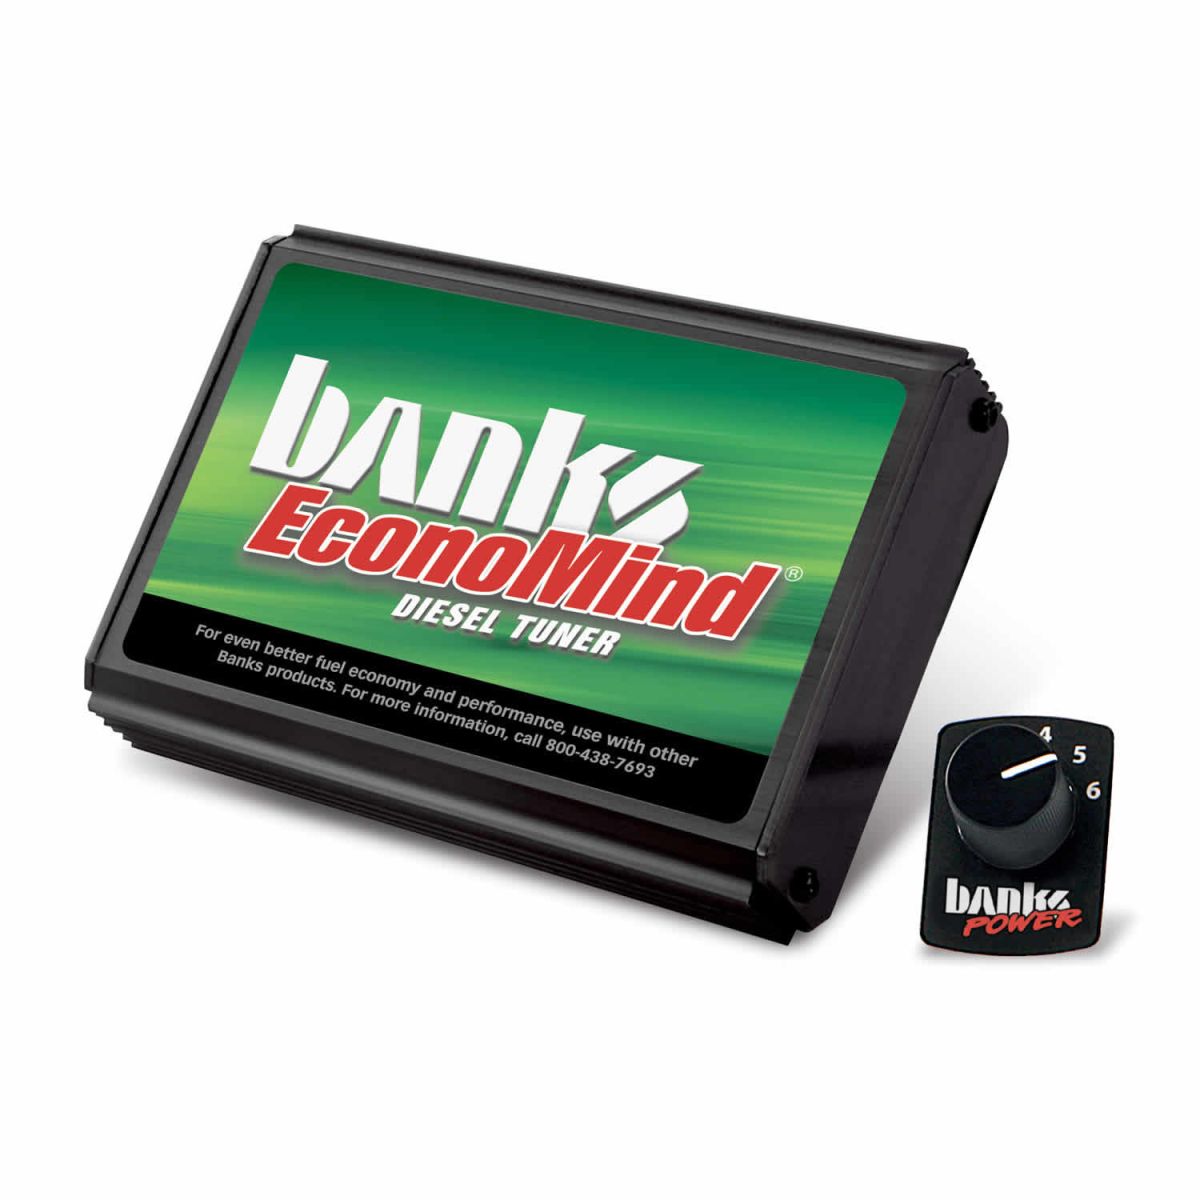 Banks Power - Banks Power EconoMind Diesel Tuner (PowerPack Calibration) W/Switch 01-04 Chevy 6.6L LB7